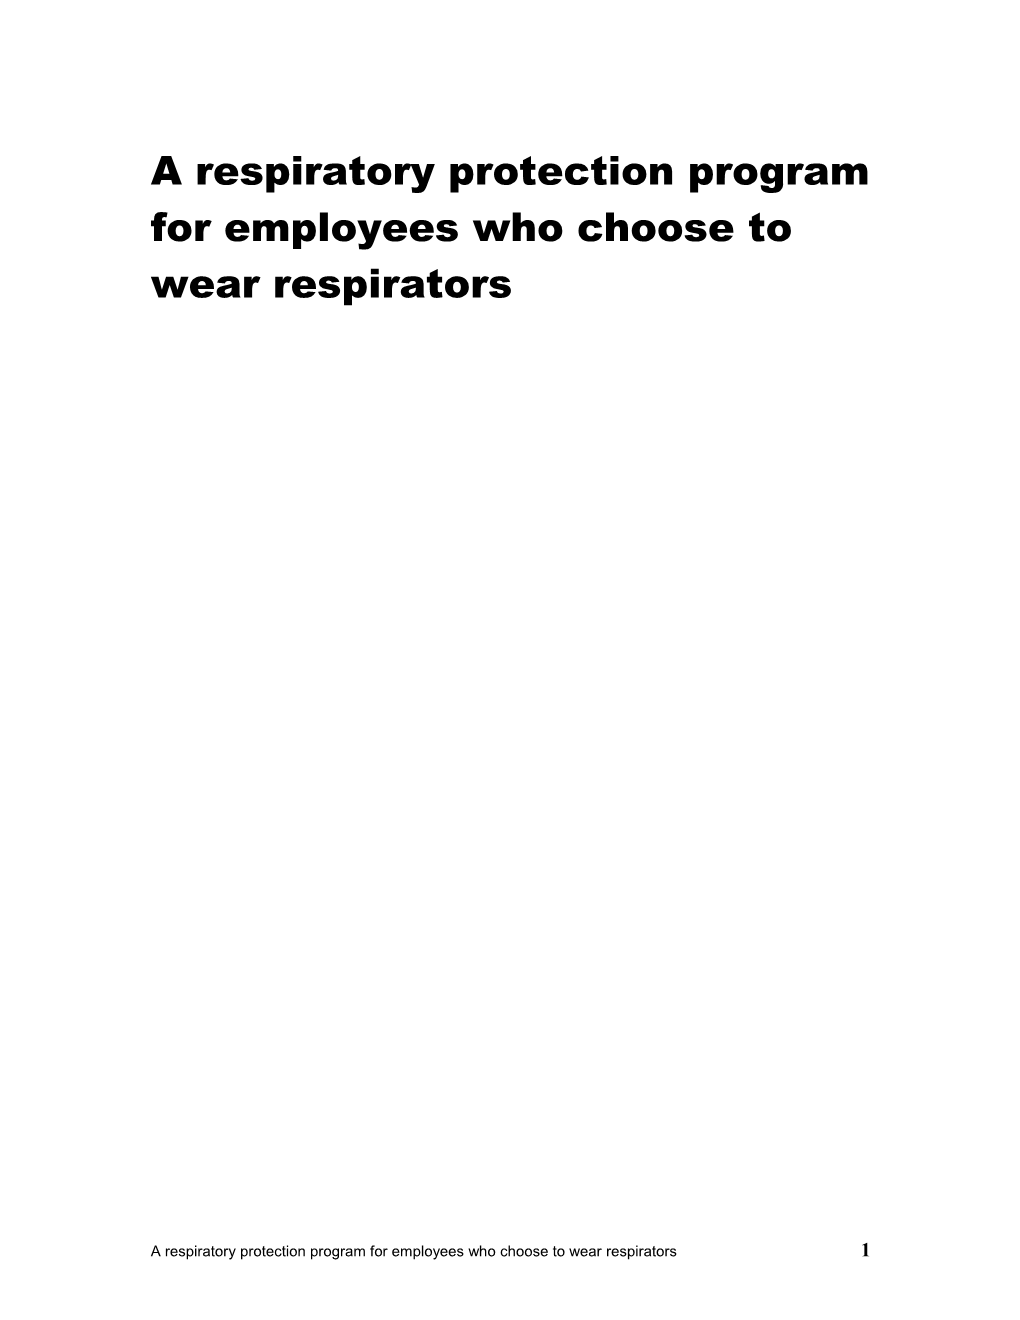 Respiratory Protection: an Example Program for Employees Who Voluntarily Use Respirators